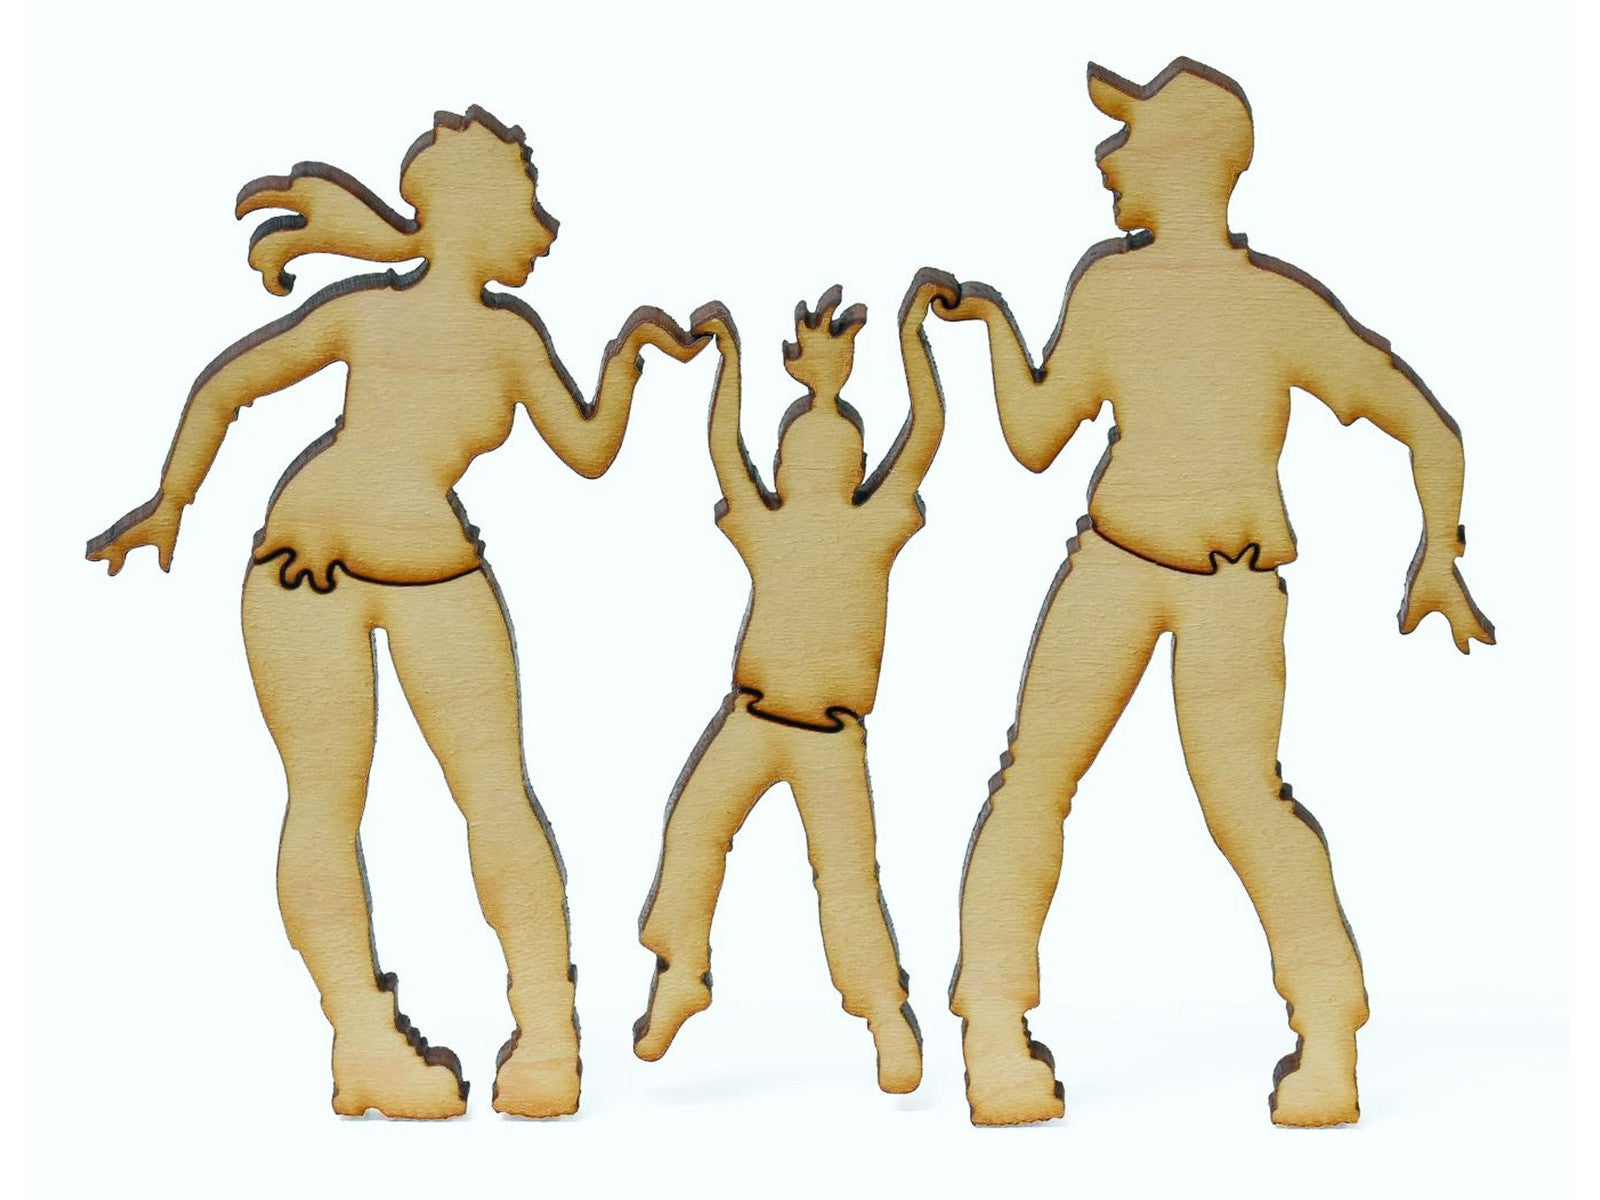 A closeup of pieces showing a family swinging a child between their arms.